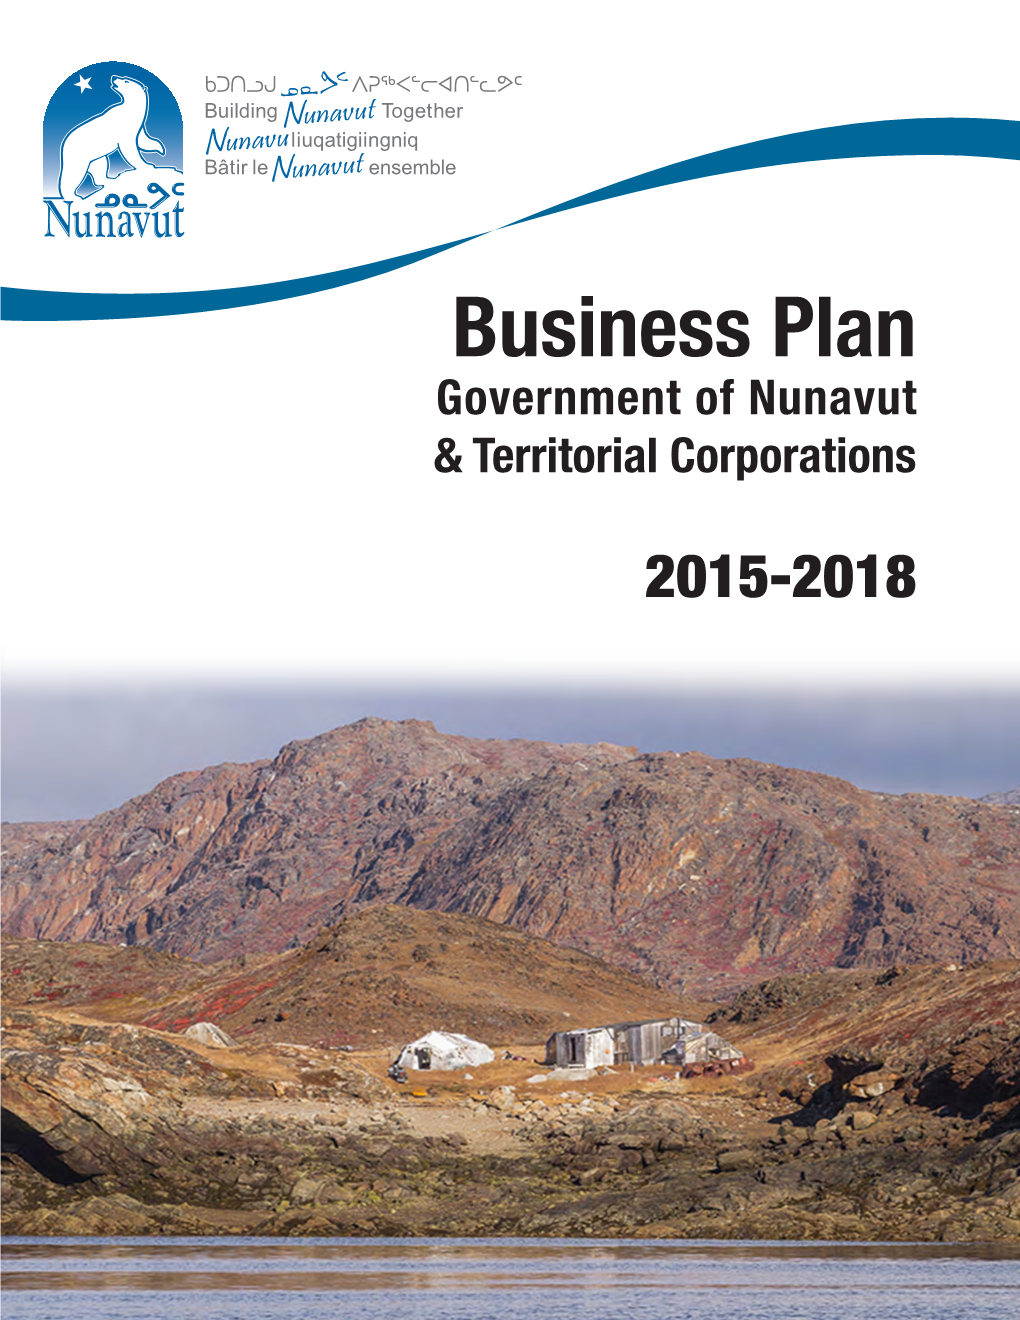 Business Plan Government of Nunavut & Territorial Corporations